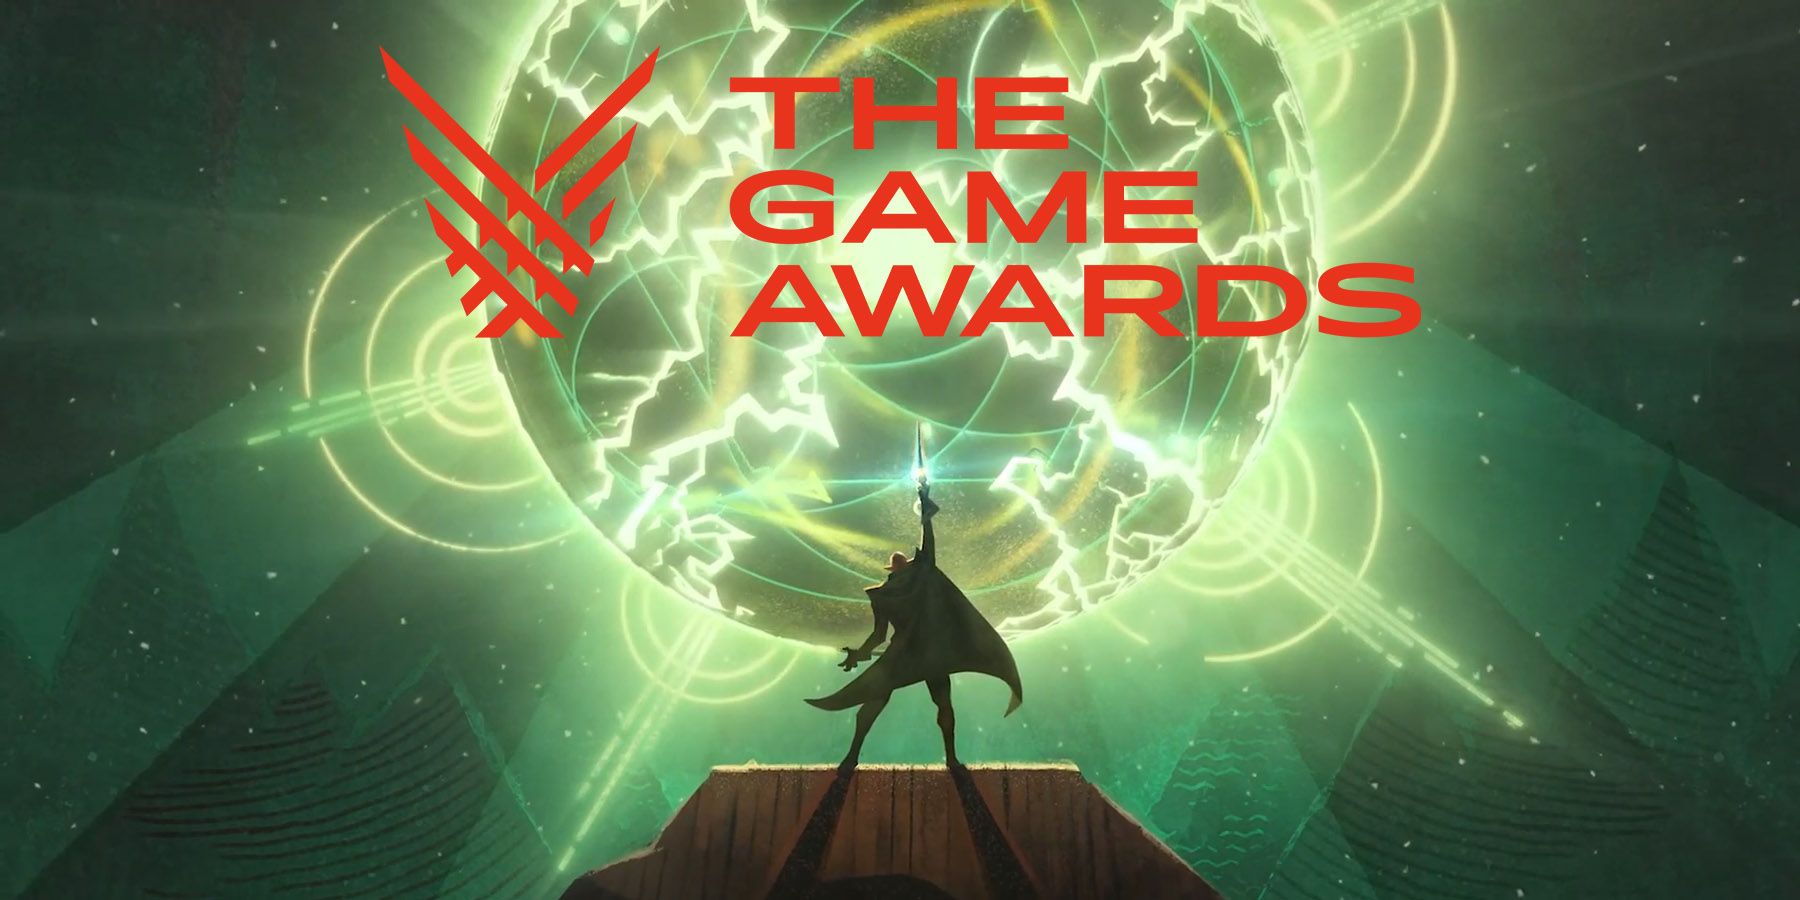 The Game Awards 2020: Winners & Results